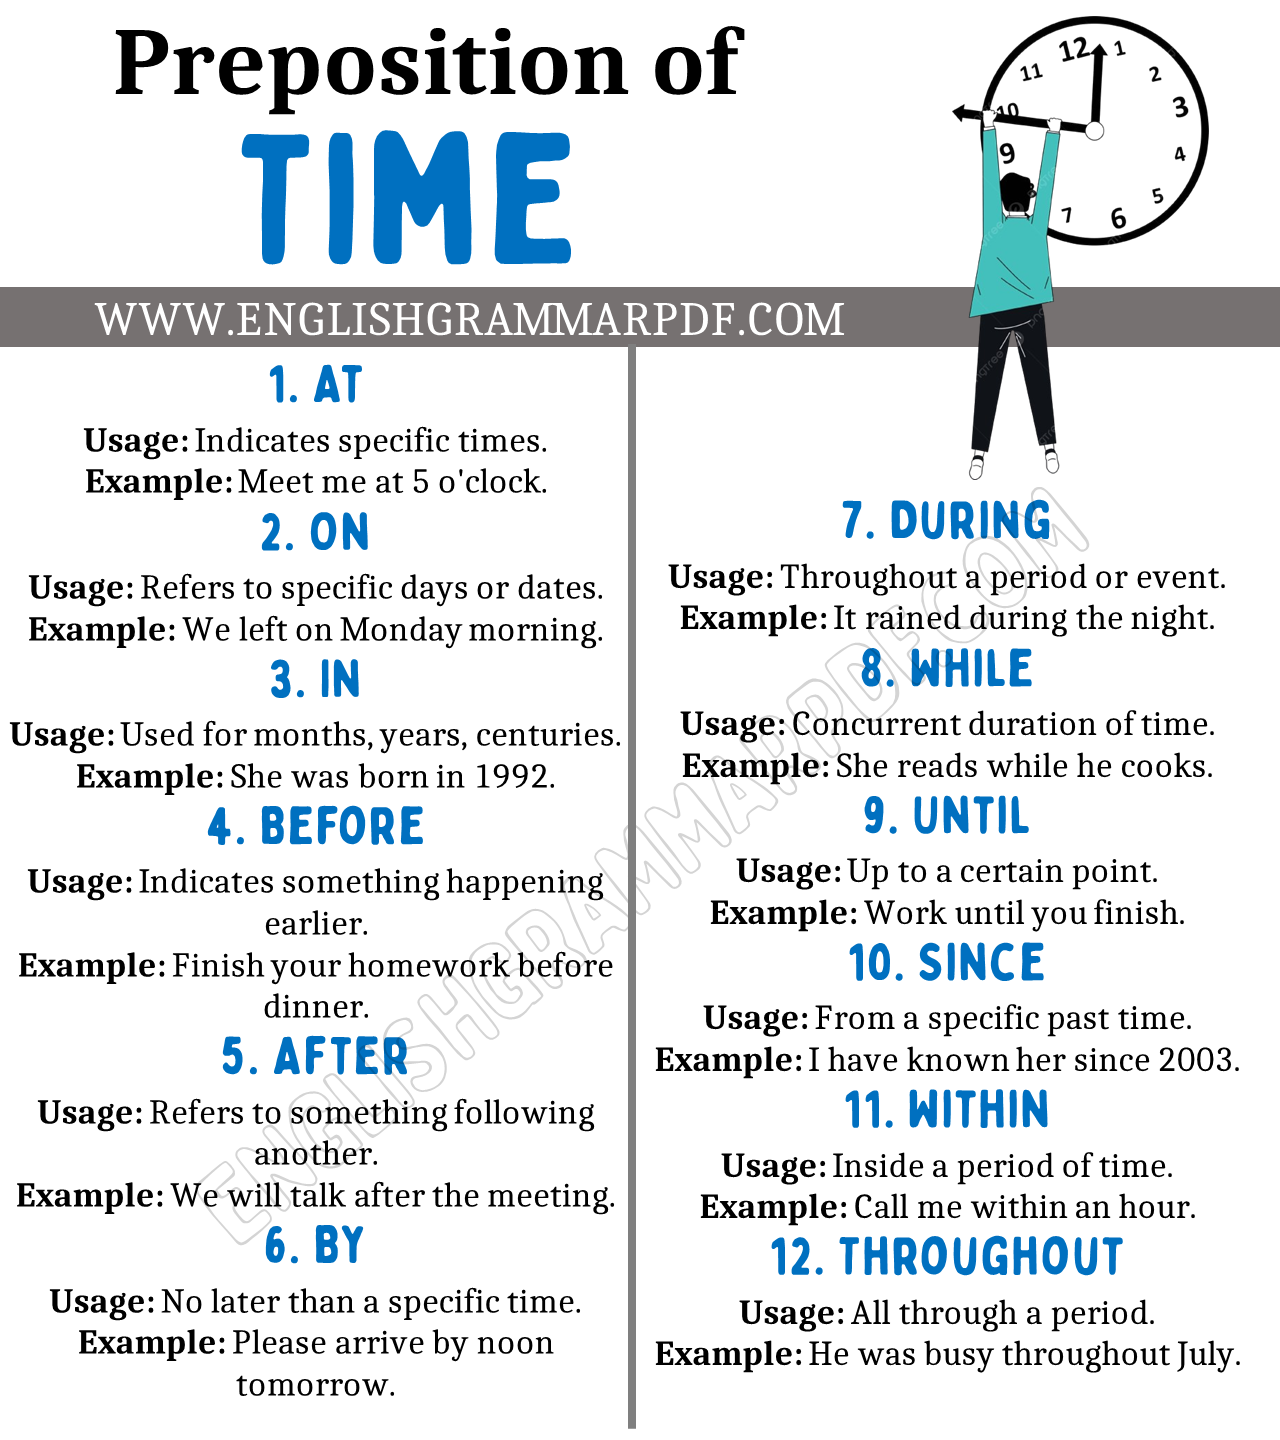 Prepositions of Time list